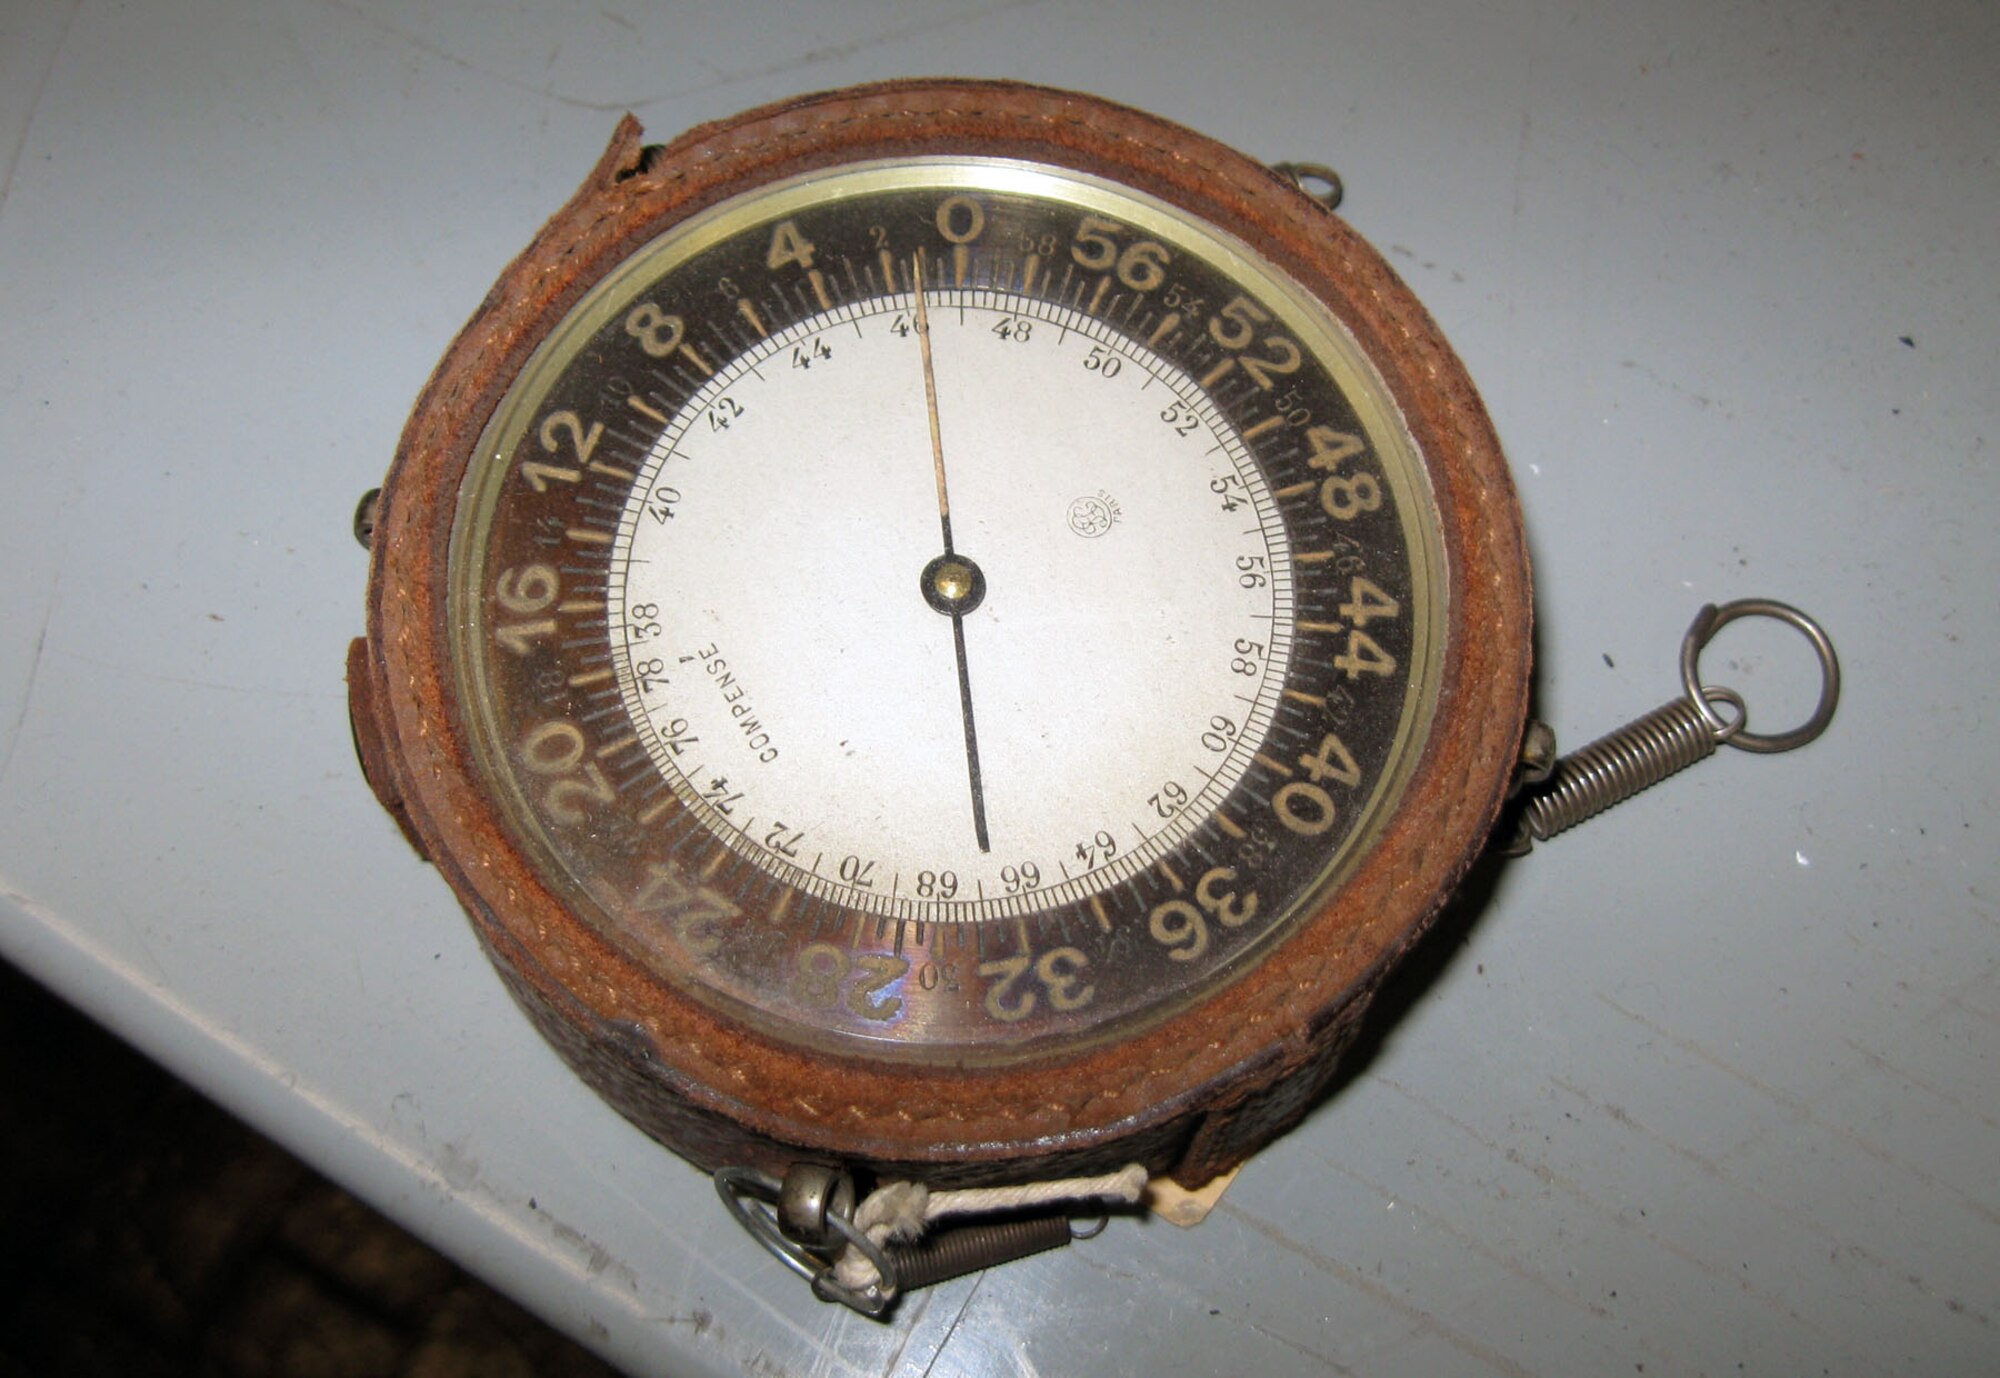 This French altimeter indicator was donated by Mr. Sol Wise, who was assigned to the French 111th Squadron as an observer. He had at least two victories and was awarded the Croix de Guerre in August 1918 and Fourragere in September 1918. (U.S. Air Force photo)